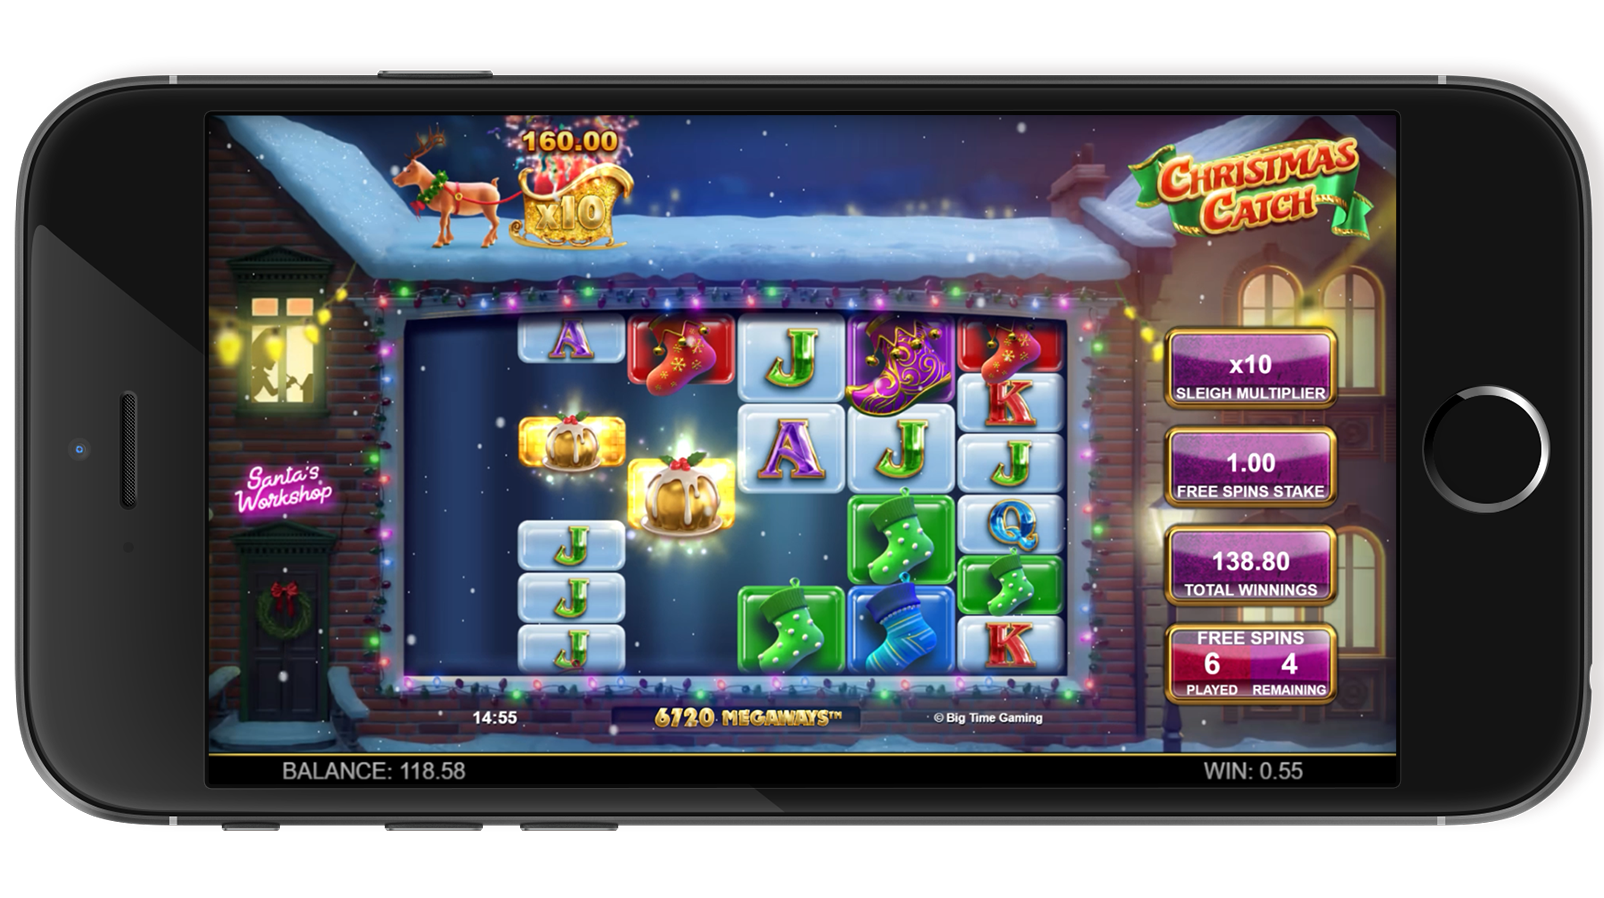 ChristmasCatch_FreeSpins_11_mobile.png